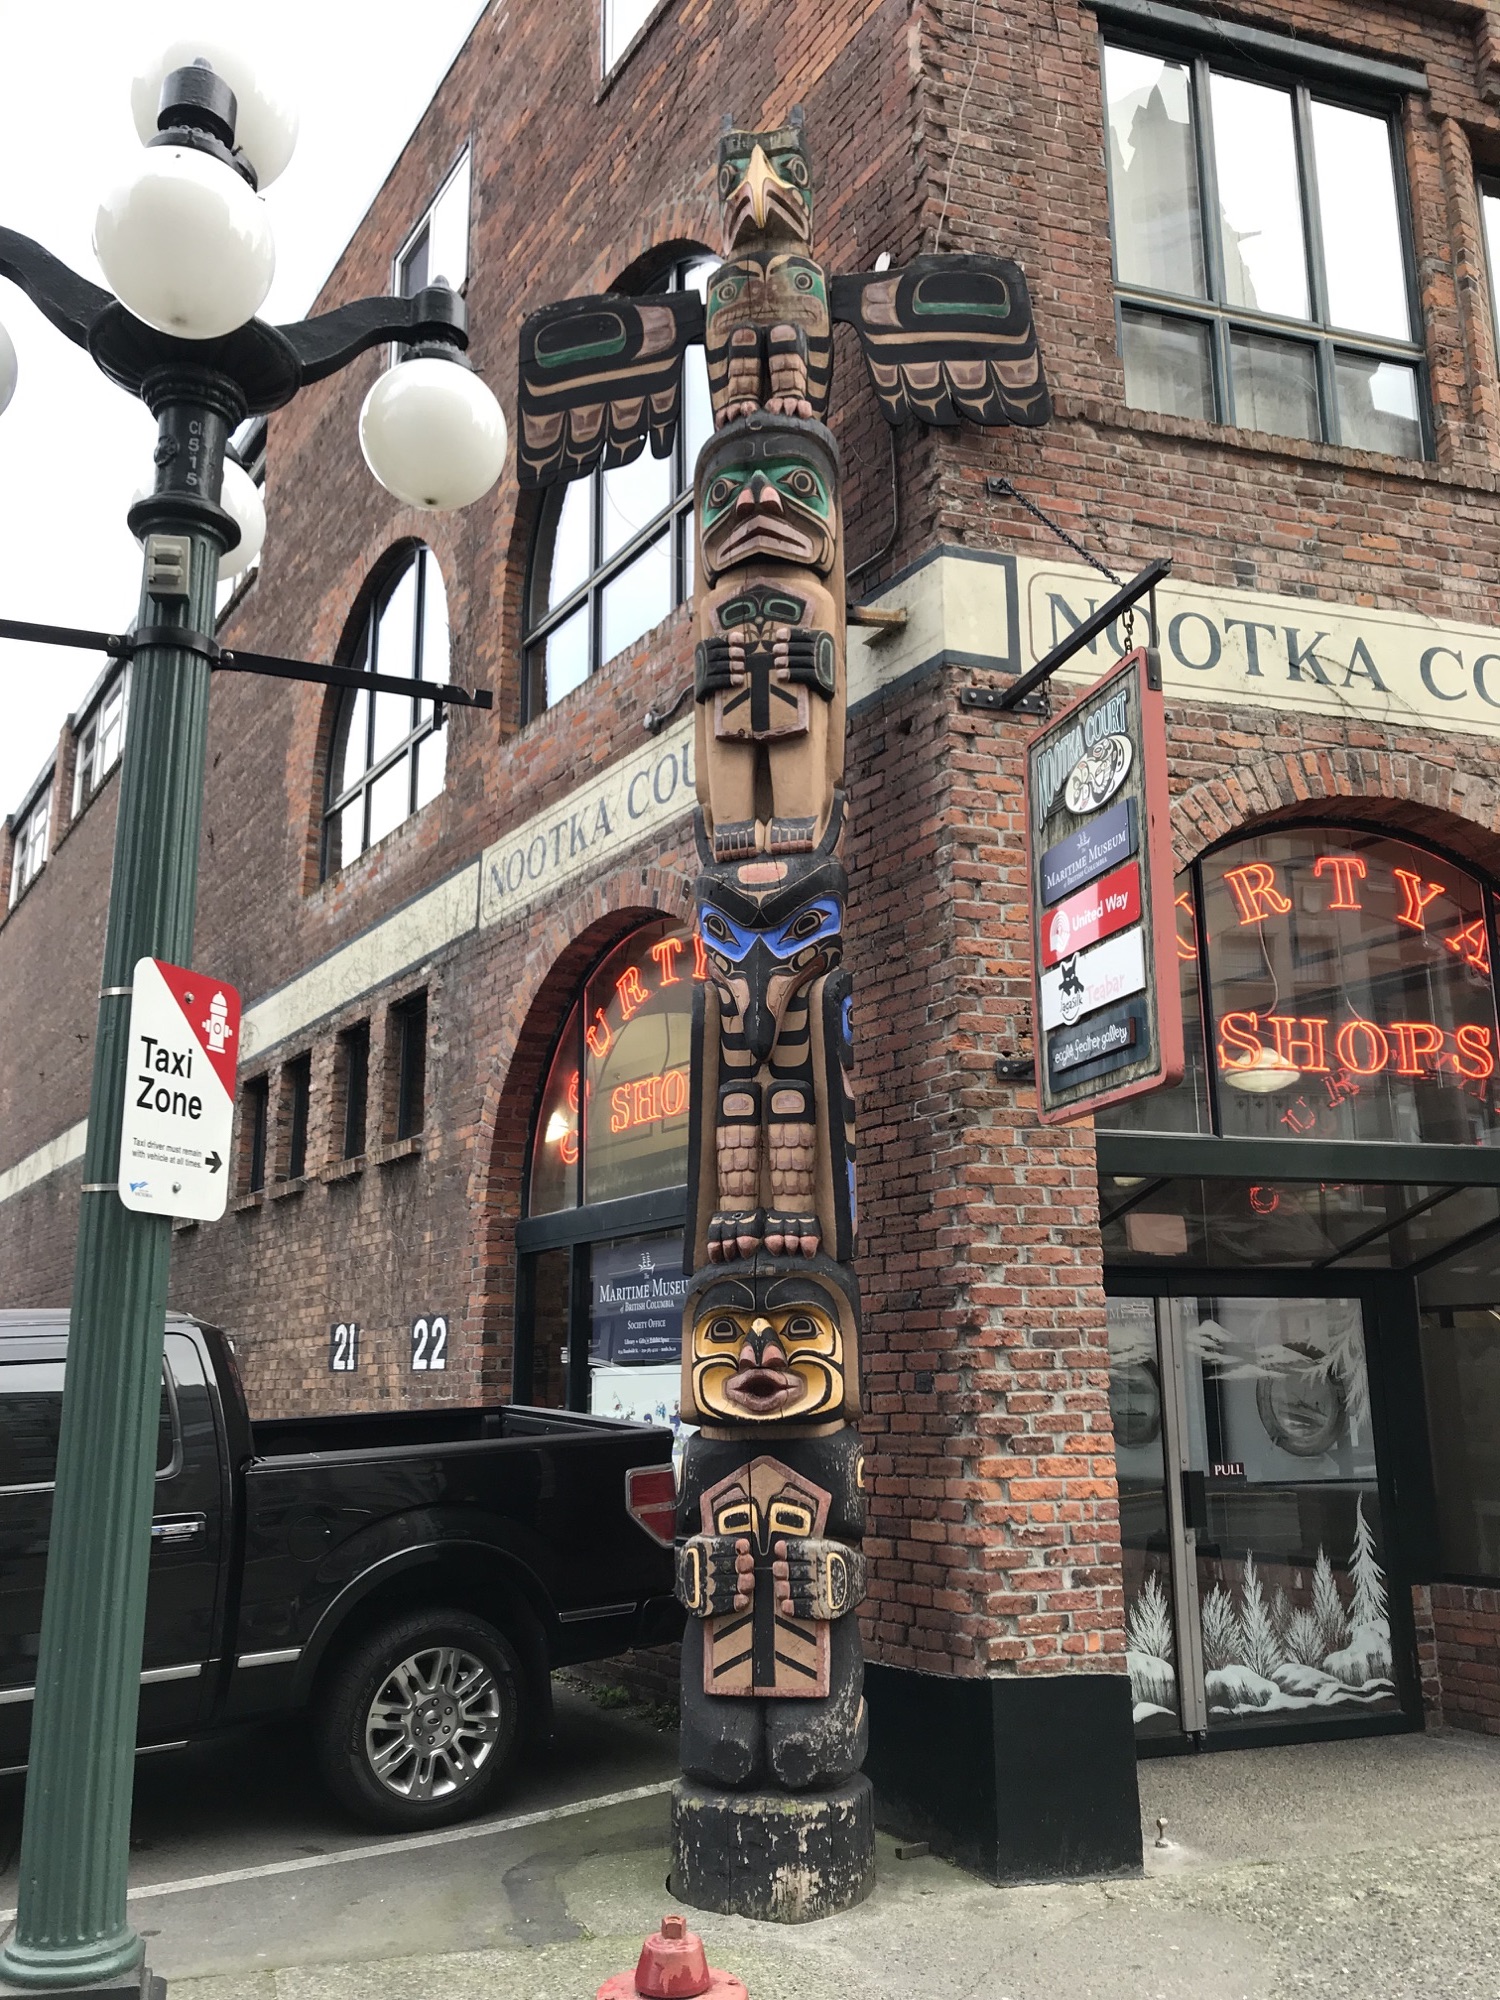 Another totem pole